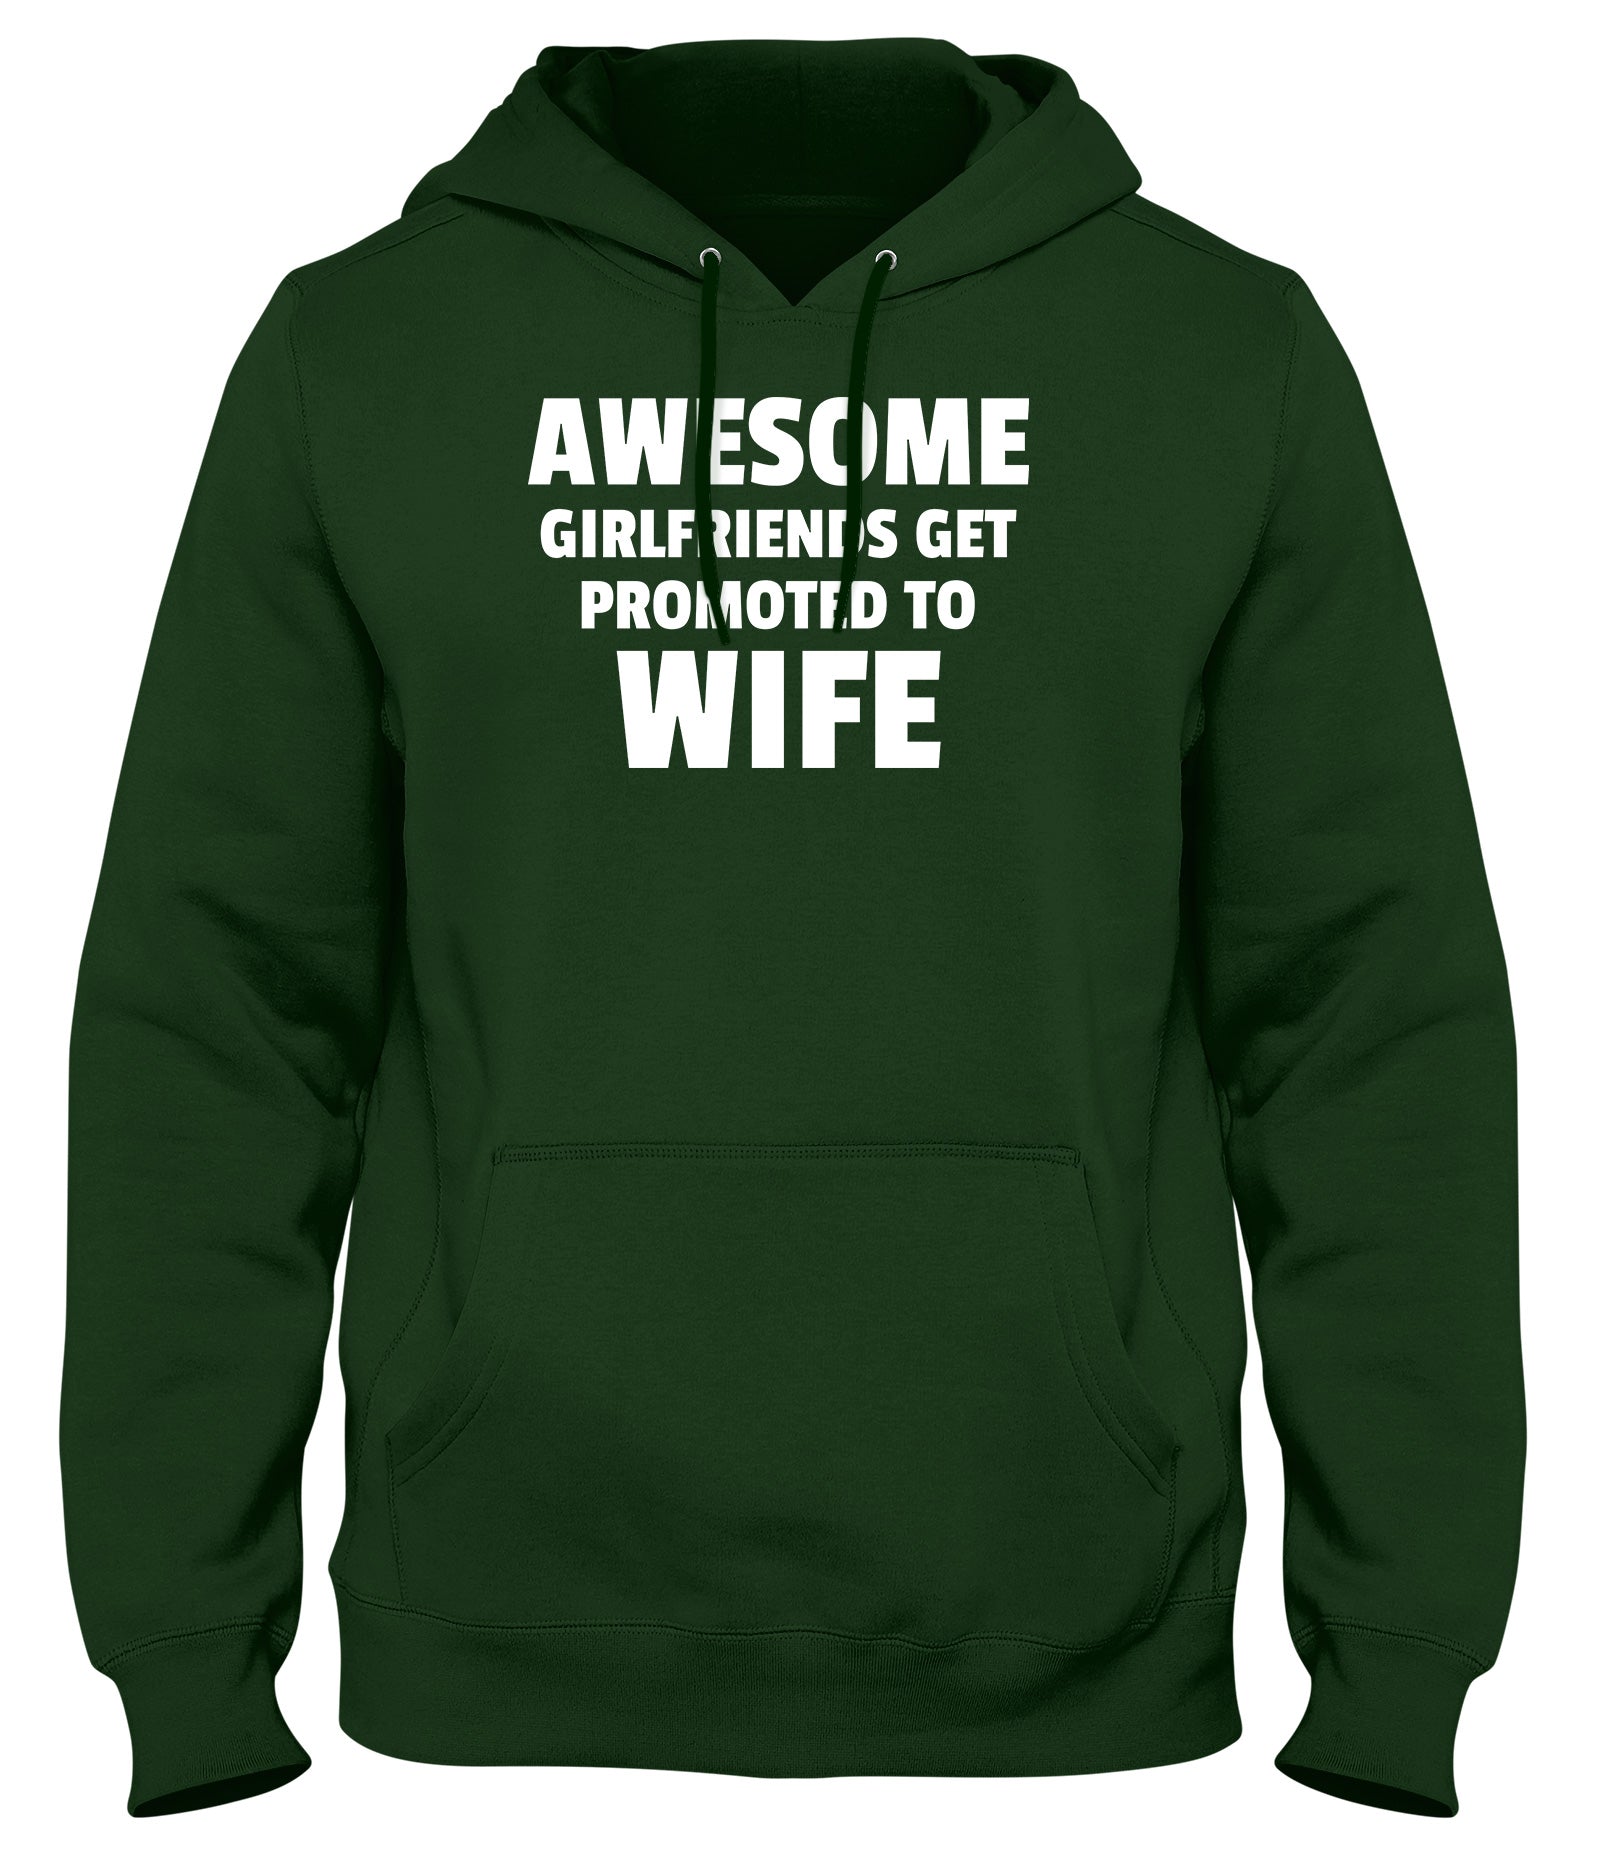 AWESOME GIRLFRIENDS GET PROMOTED TO WIFE MENS LADIES WOMENS UNISEX HOODIE